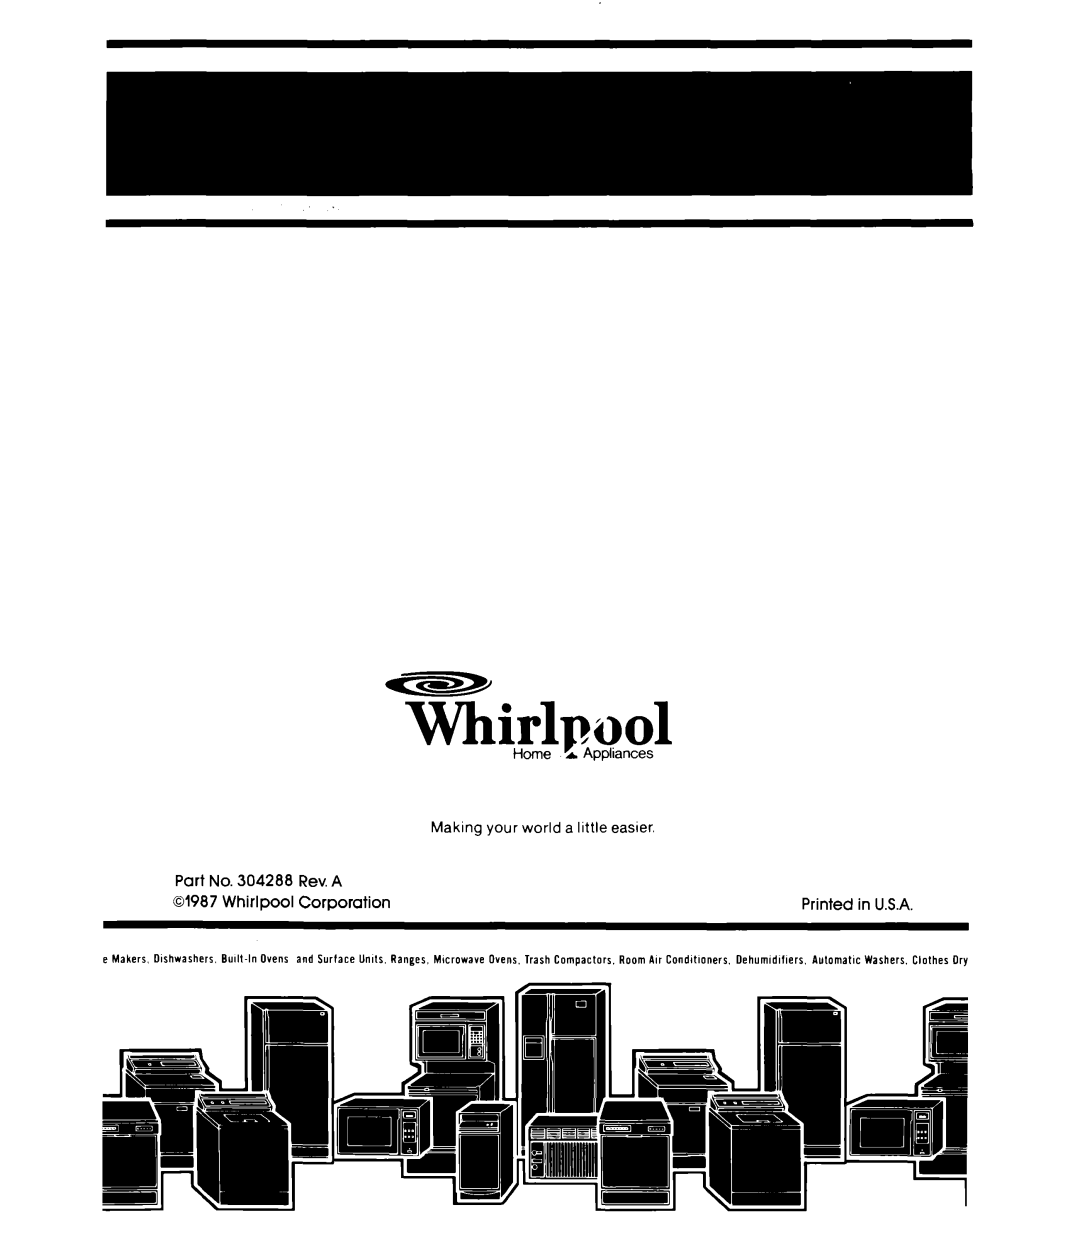 Whirlpool DU95OOXS manual Part No. 304288 Rev. A, Whirlpool Corporation 